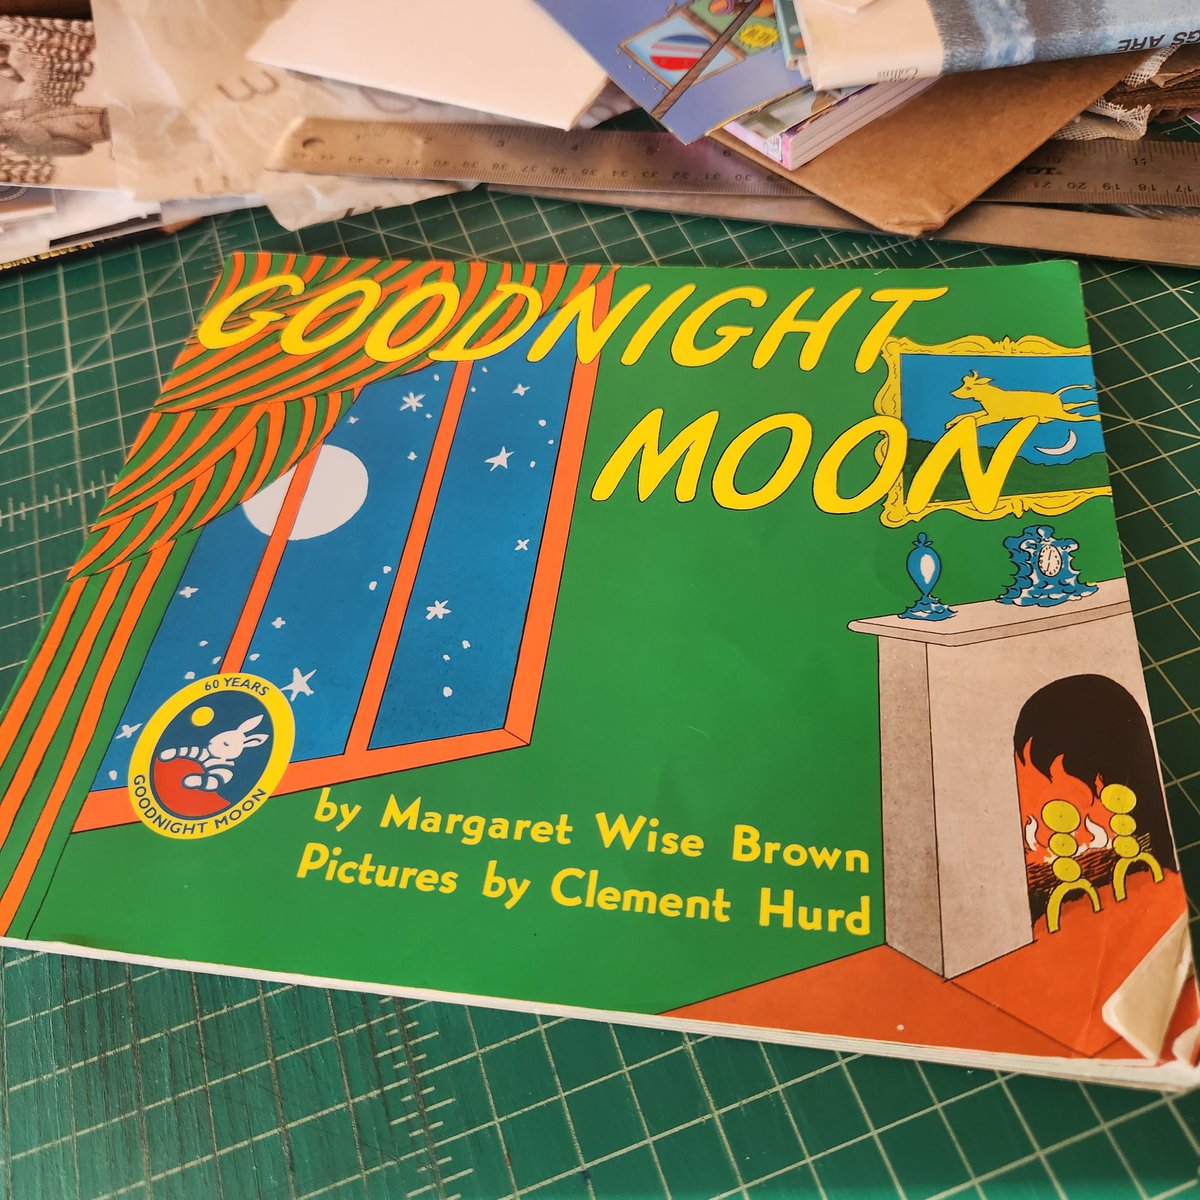 I got two sets of pennants out of Goodnight Moon and made one full banner last night. I'm kind of embarrassed to say I never noticed  before that the pages get darker as the book progresses. #ammaking #kidlit